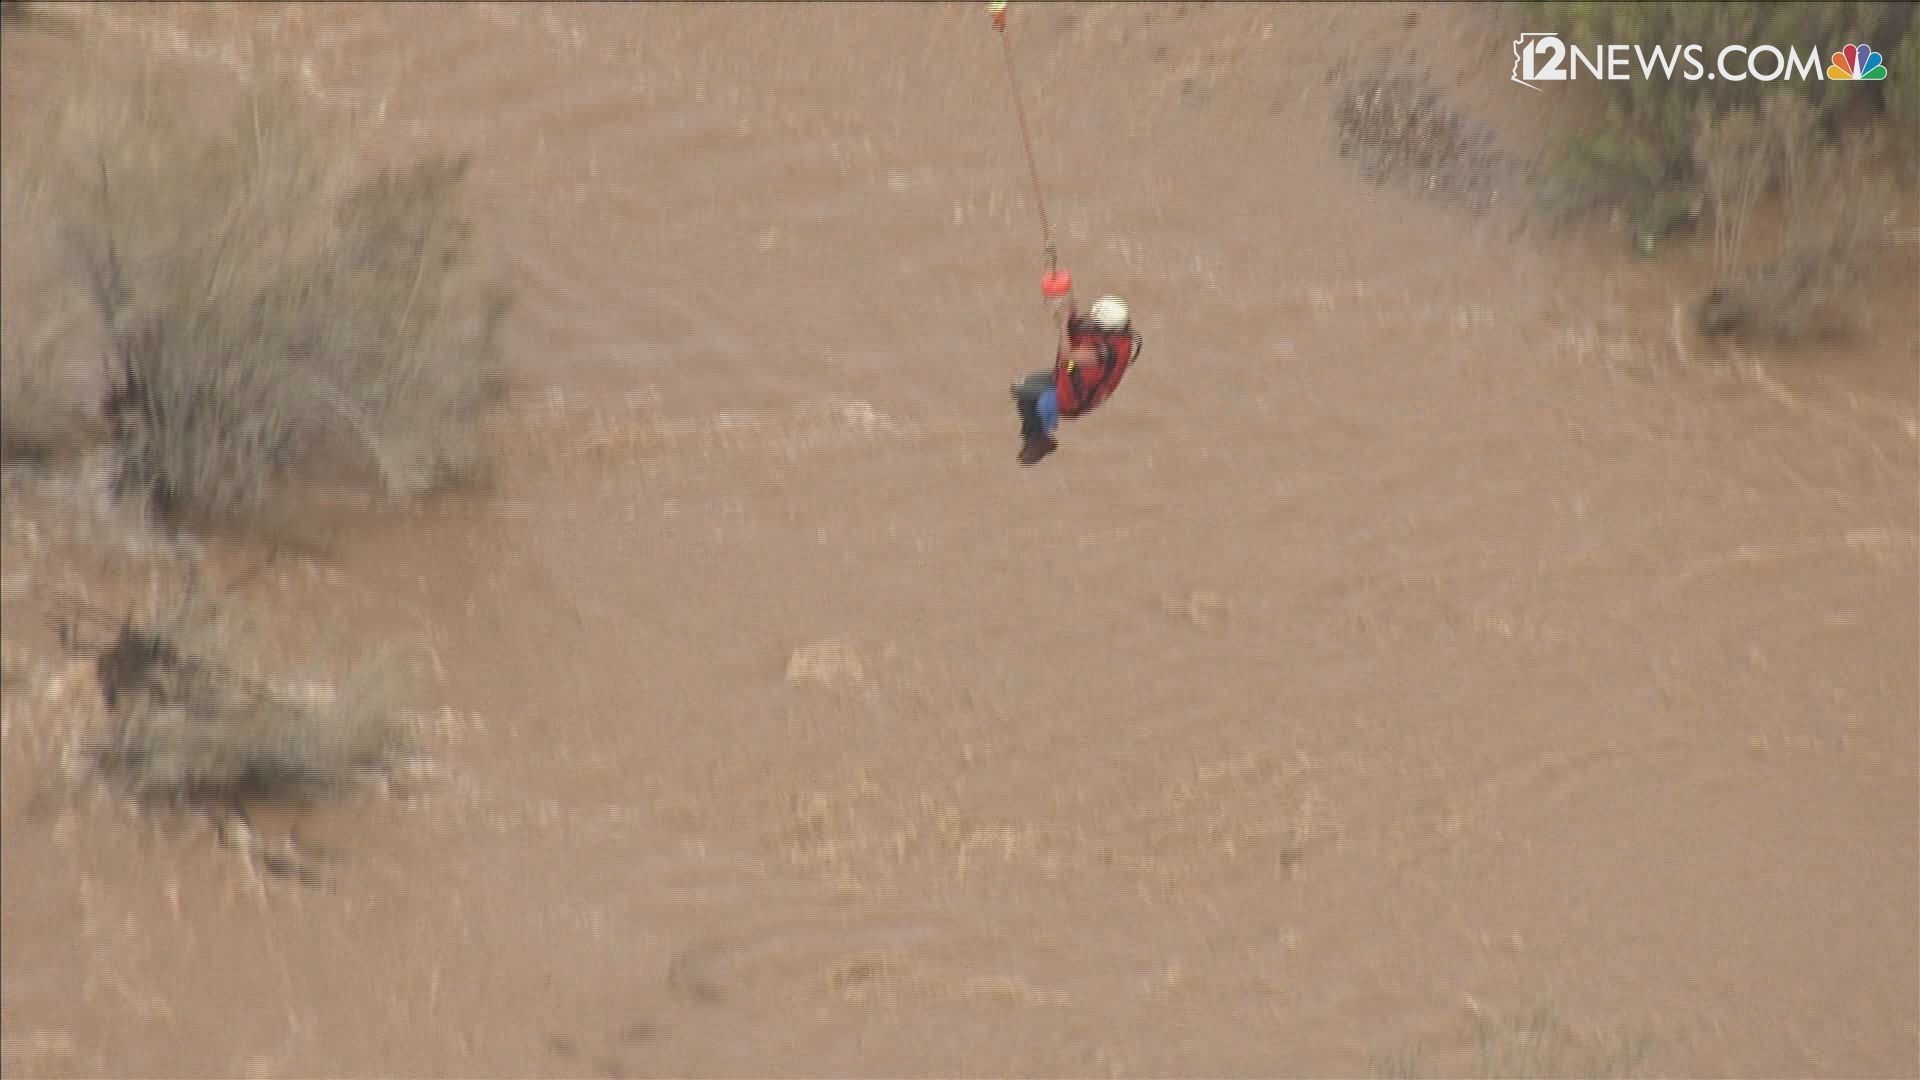 Two people who were stuck in Queen Creek wash have been rescued by Rural Metro Fire. It is unclear at this point how or why the two people got stuck. Rural Metro used a helicopter to get the two to safety.